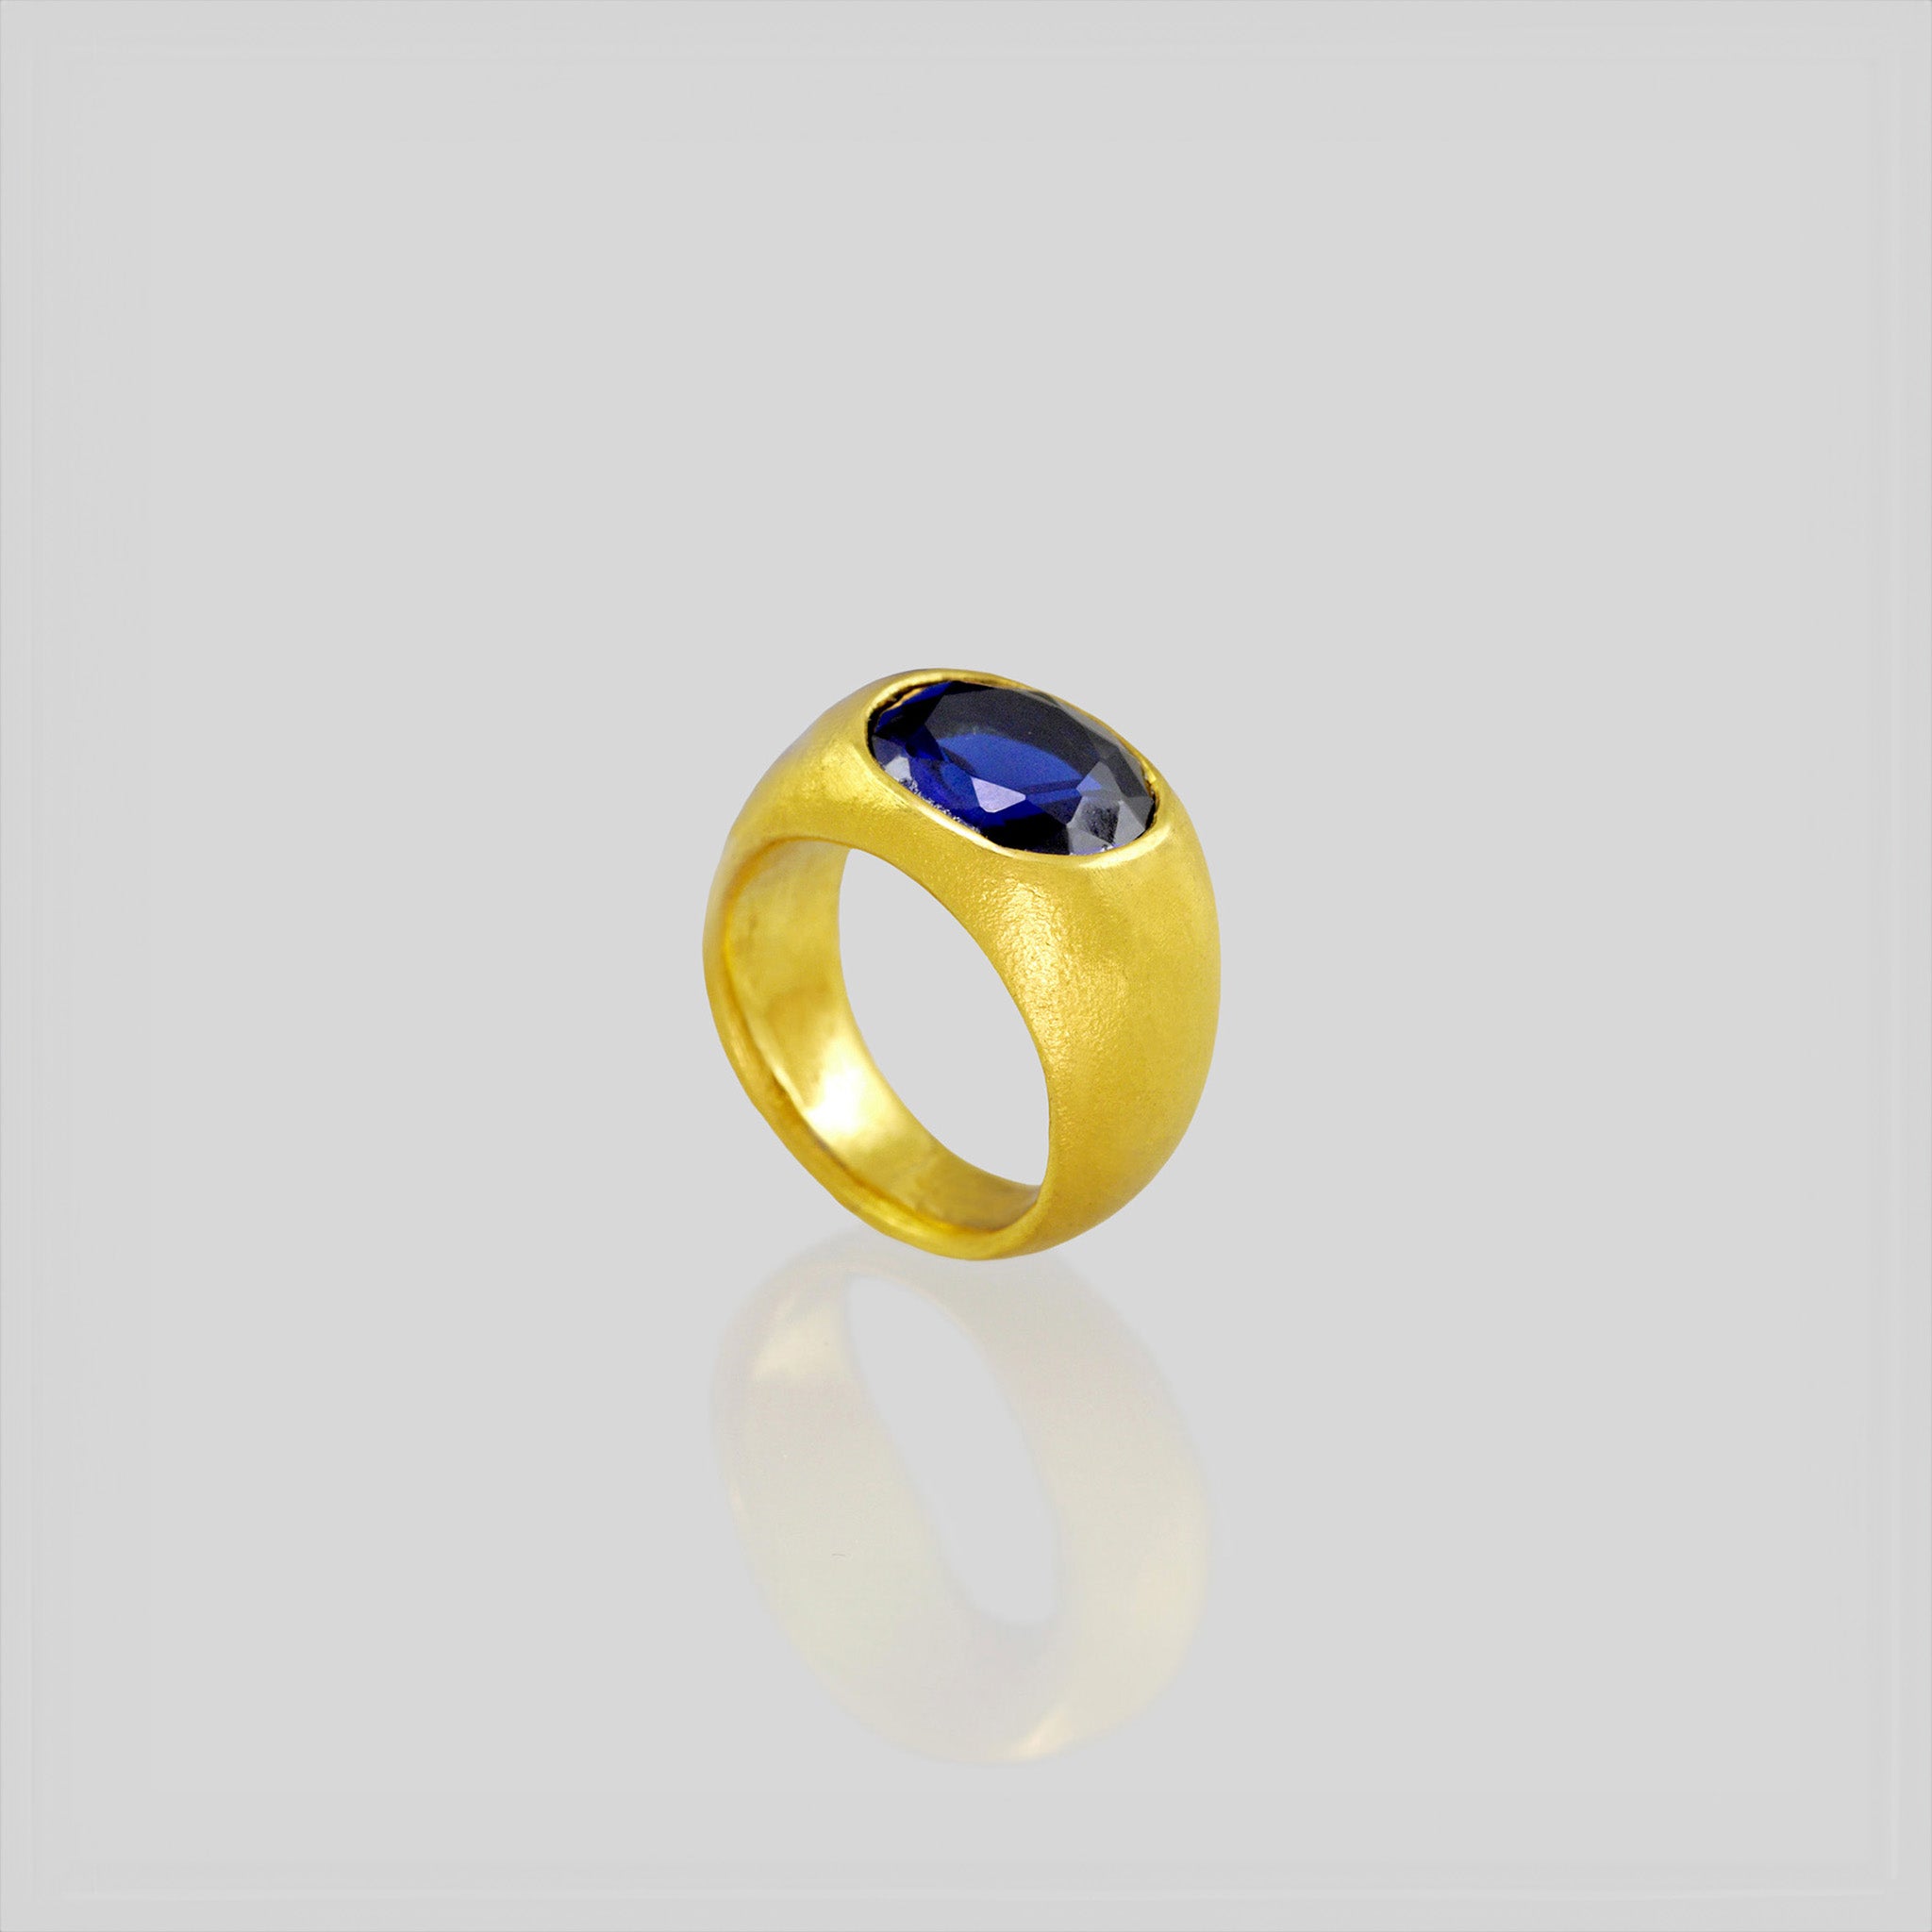 A timeless gold oval ring adorned with a captivating Sapphire gemstone. This classic piece exudes traditional elegance and is beloved for its enduring appeal.